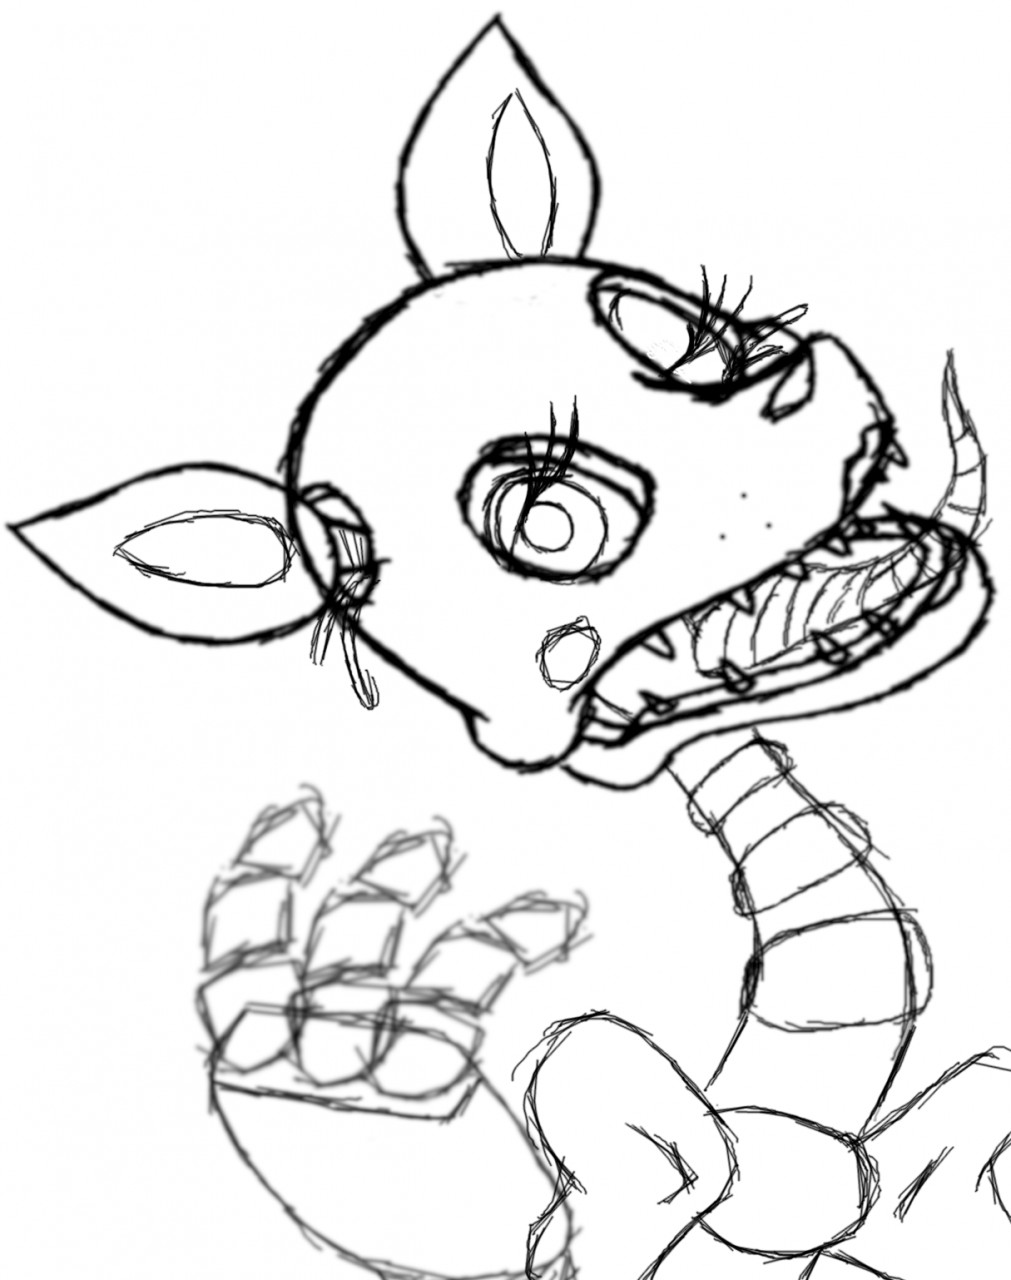 The mangle beckons sketch by blacknwhitefluftail